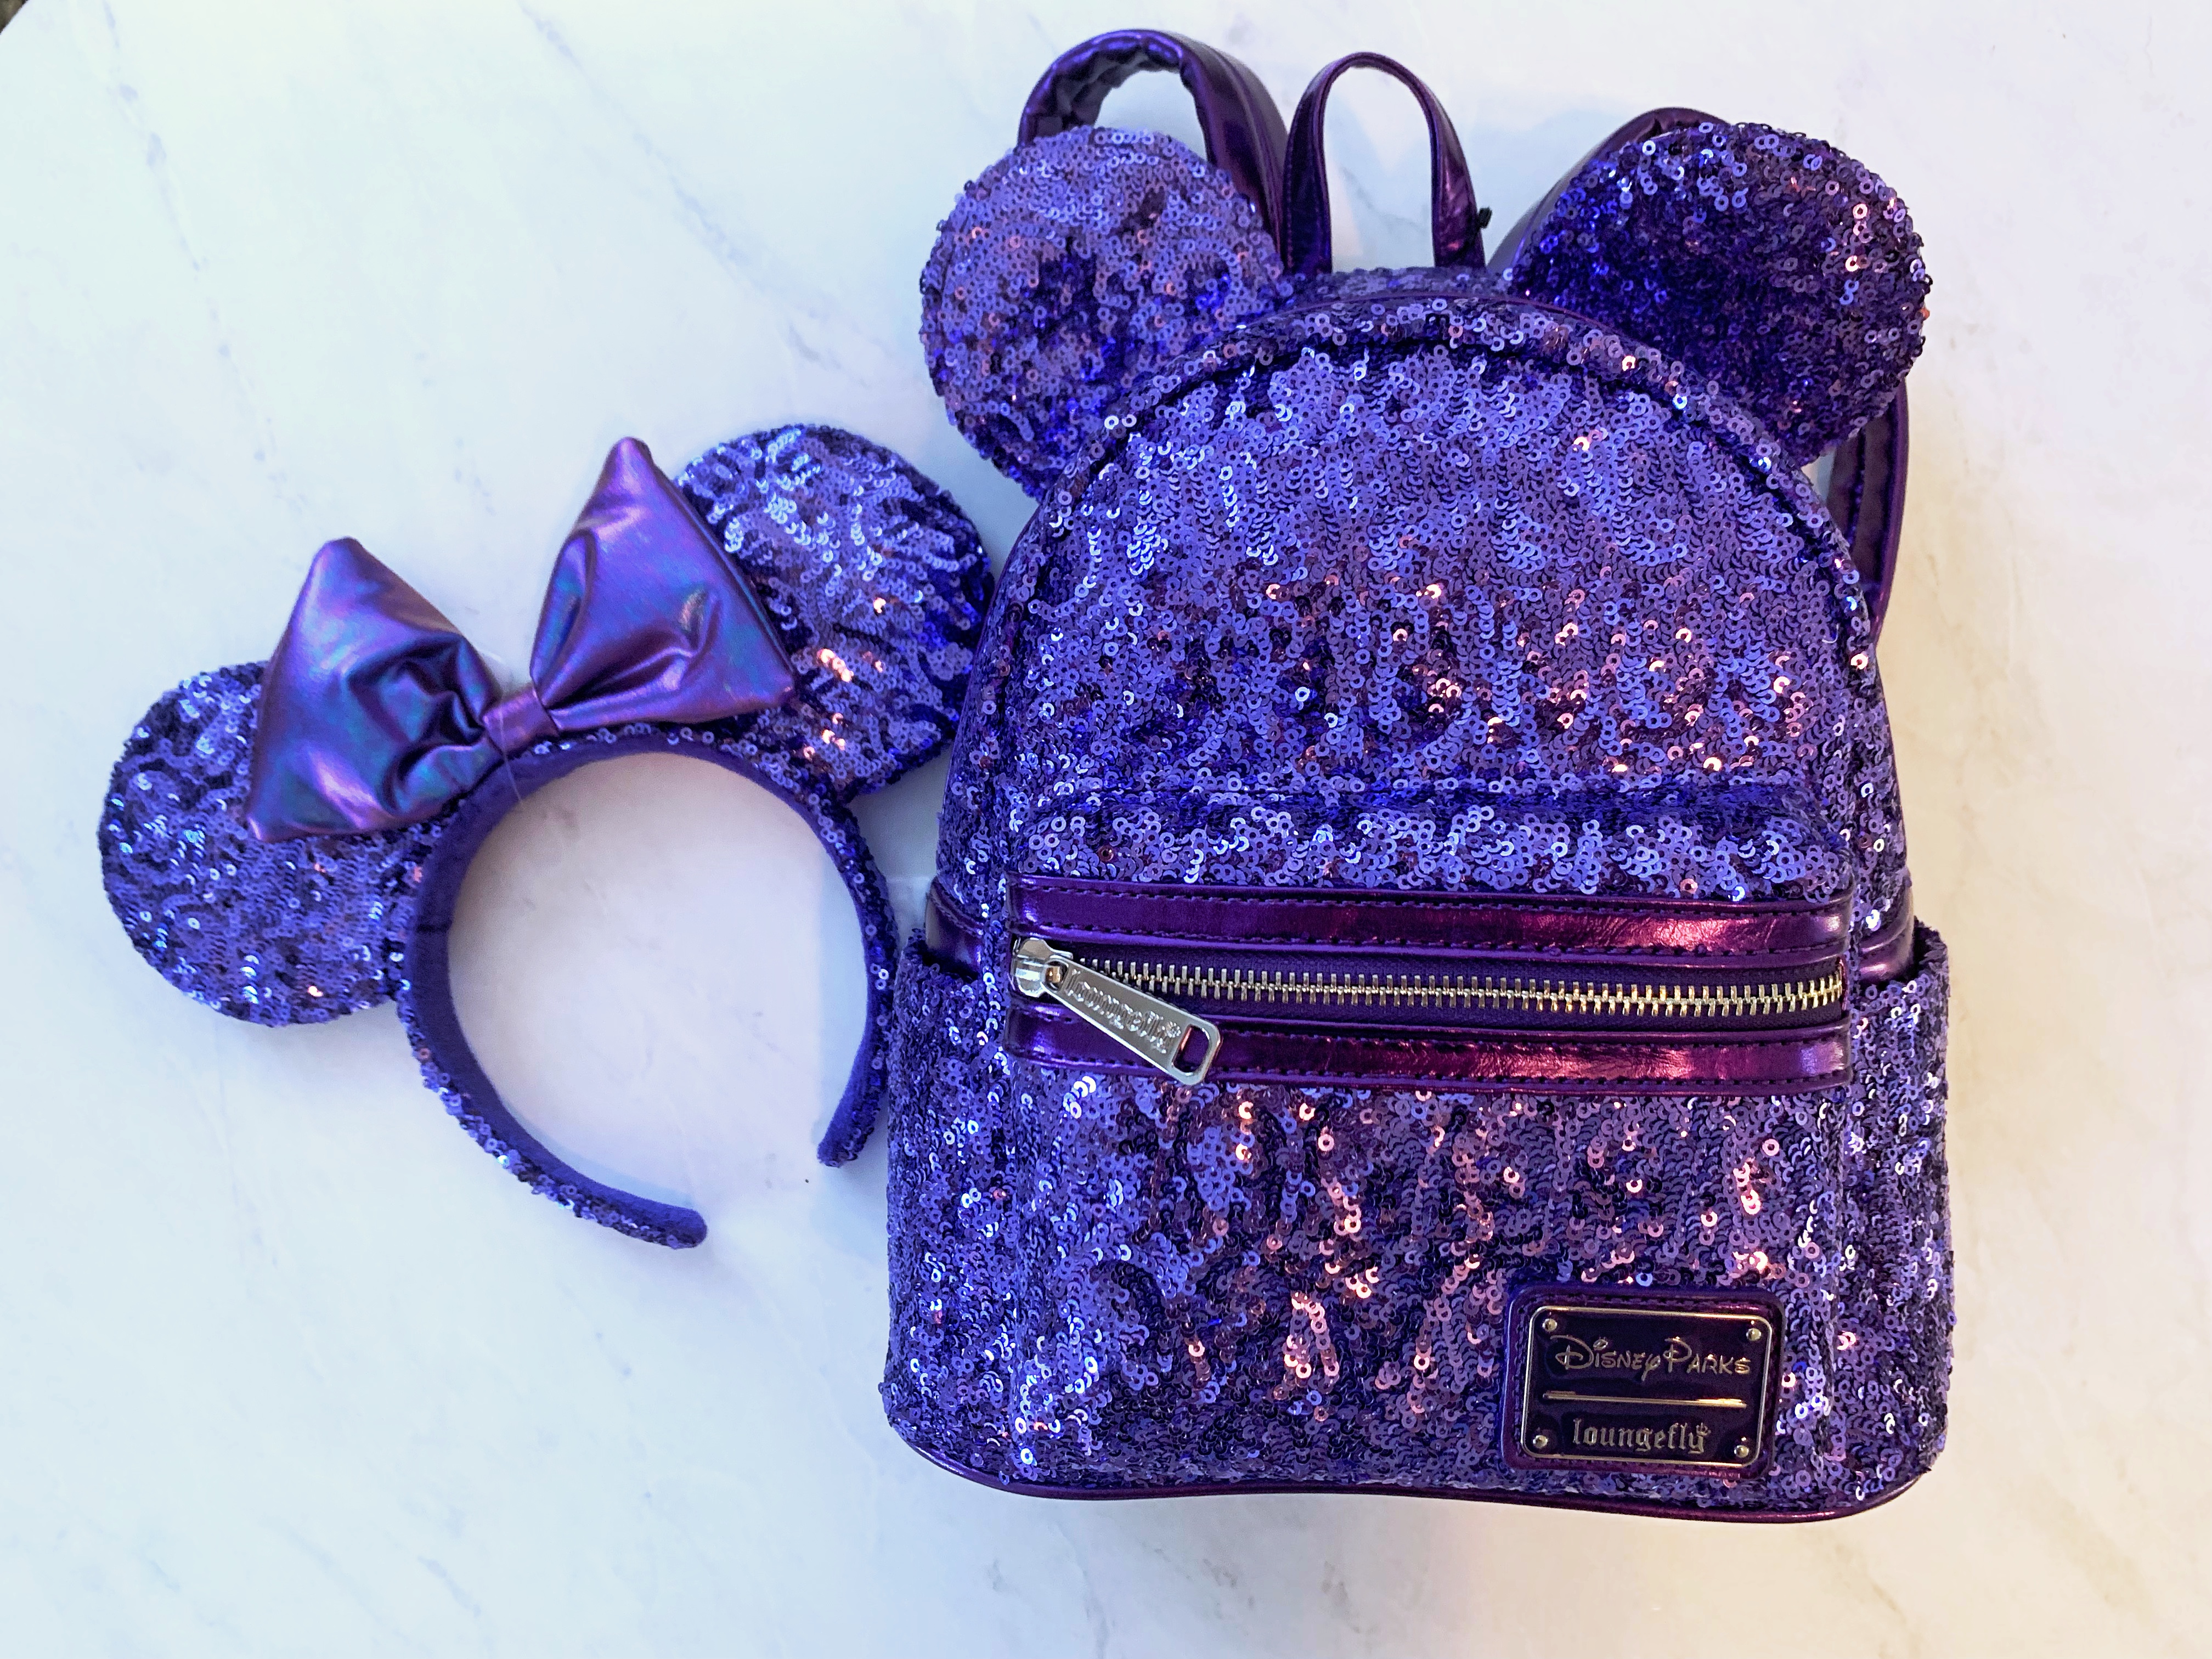 Awesome giveaway for Disney Lovers!